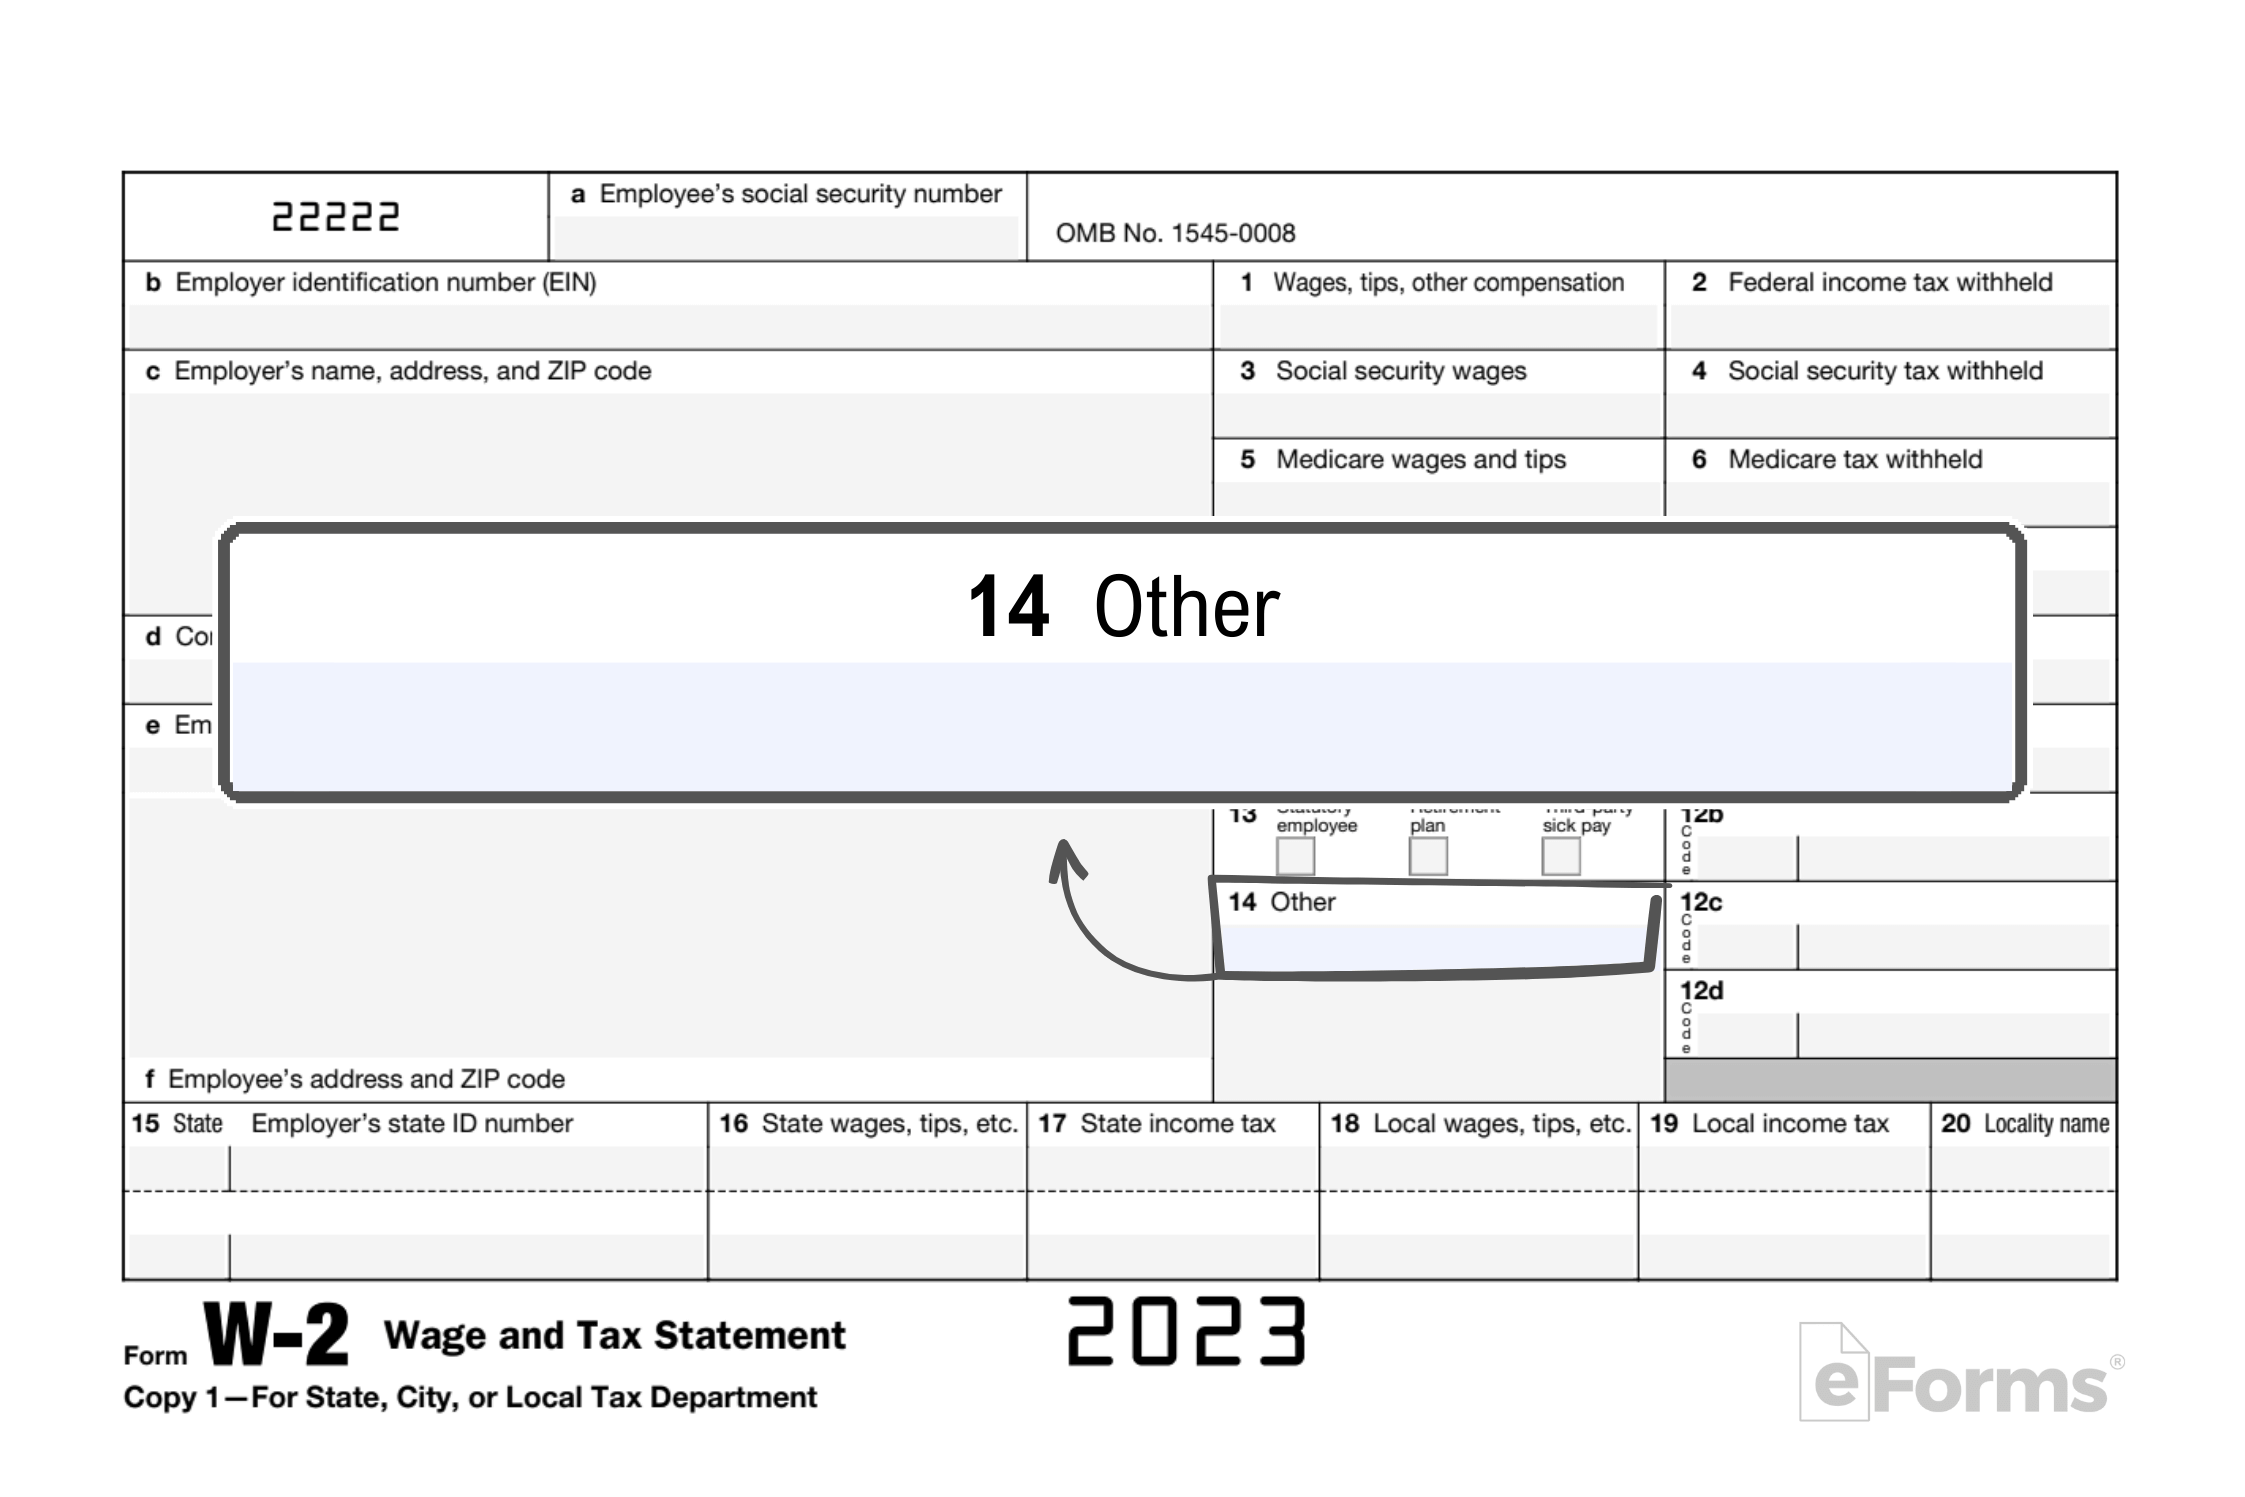 Free Irs Form W-2 | Wage And Tax Statement - Pdf – Eforms intended for W2 Form 2022 Printable Free